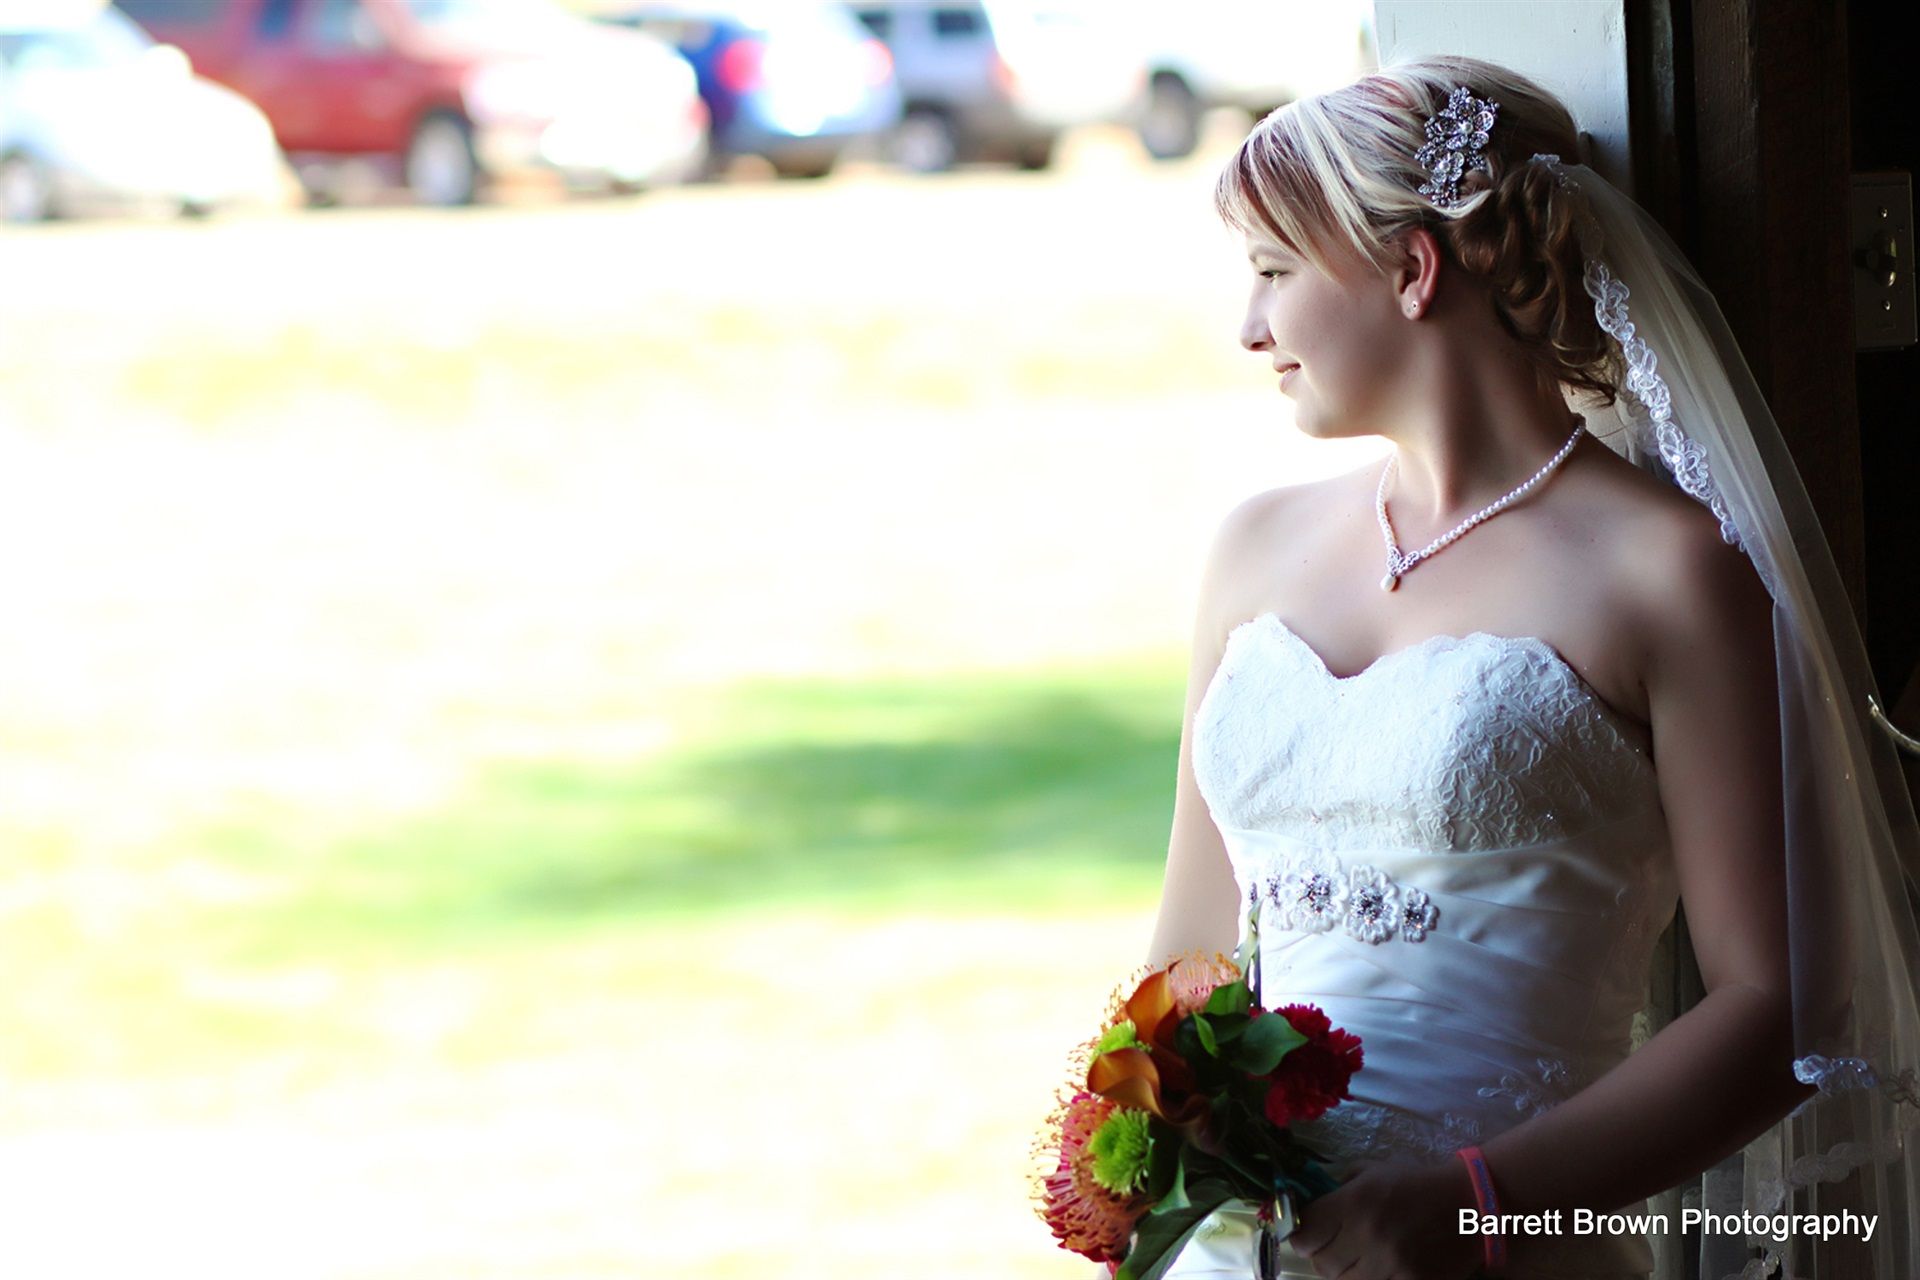 Bride, holding a red and white bouquet, looking out to blurred field